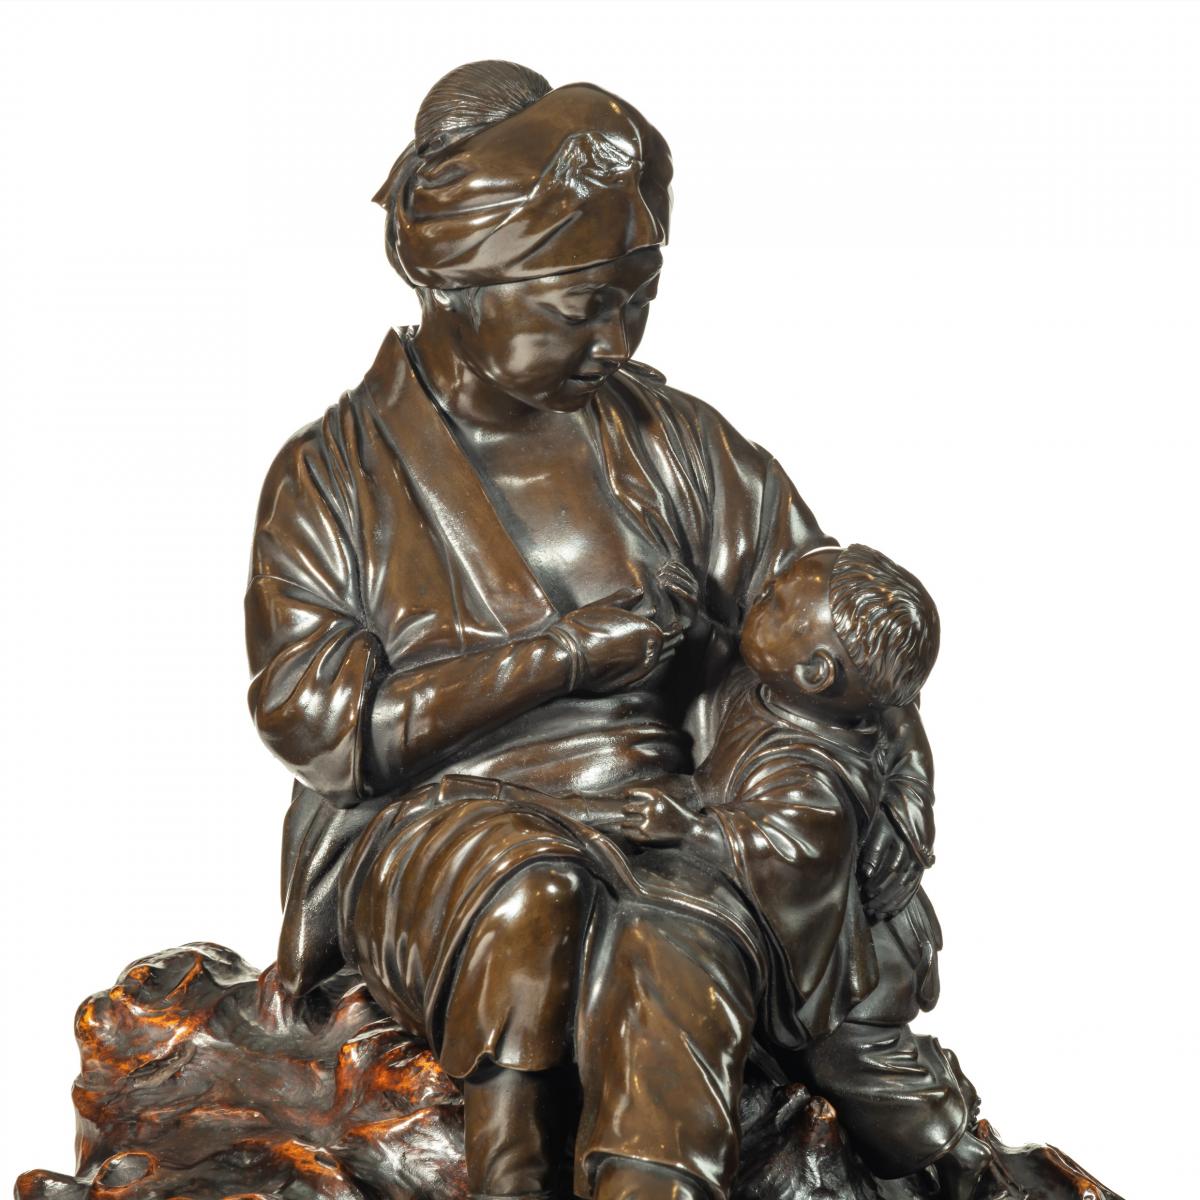 A Meiji period bronze sculpture of a mother and son by Atsuyoshi